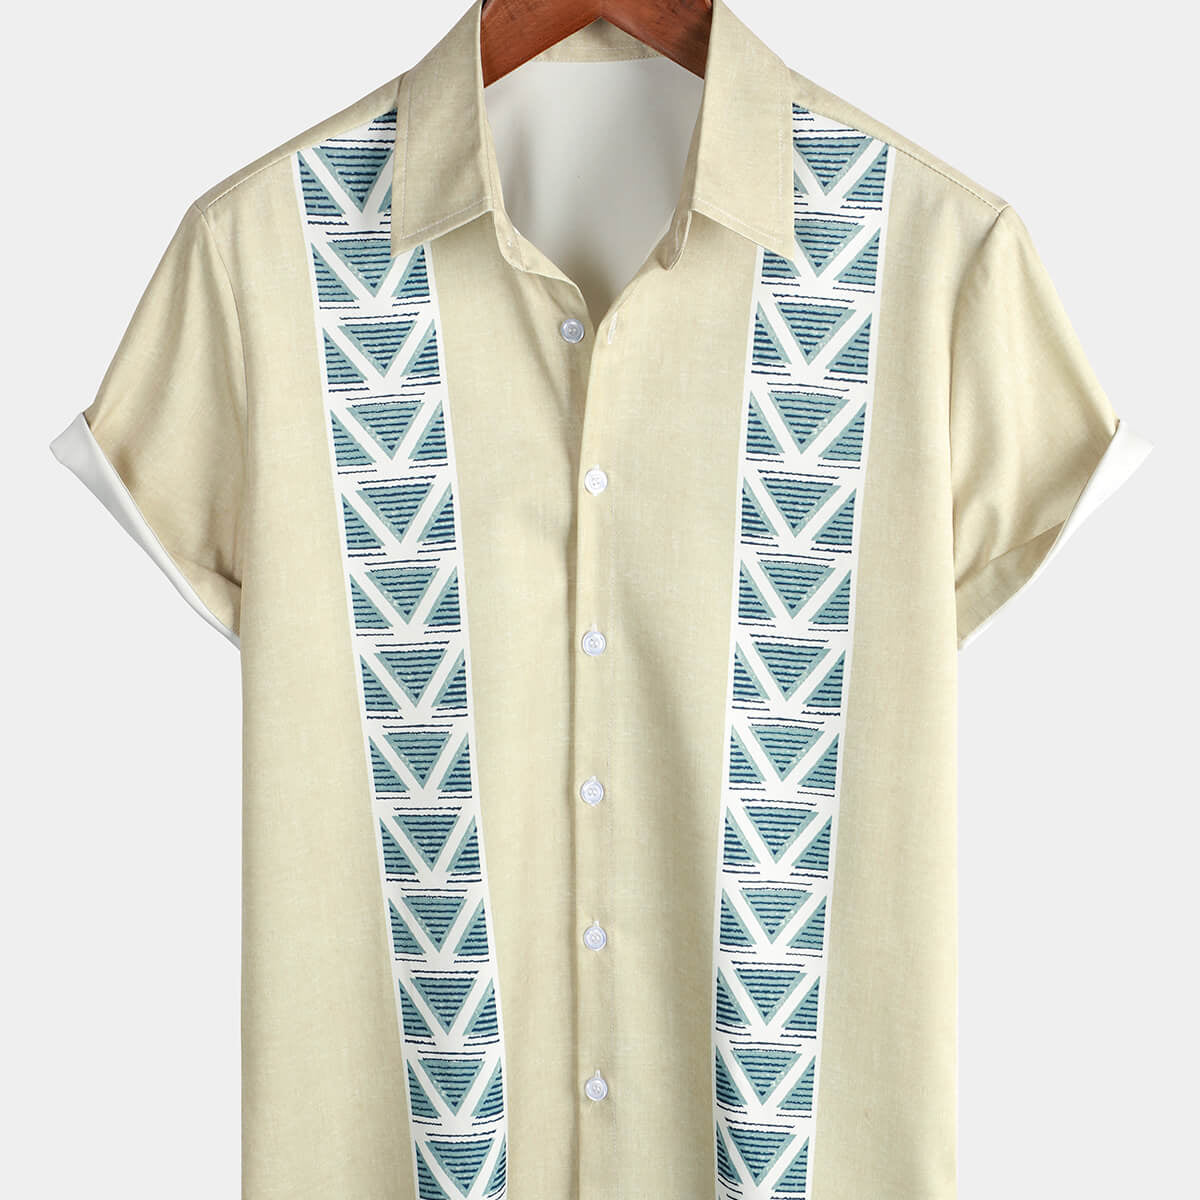 Men's Casual Geometric Blue Bowling Striped 50s Vintage Short Sleeve Button Up Shirt